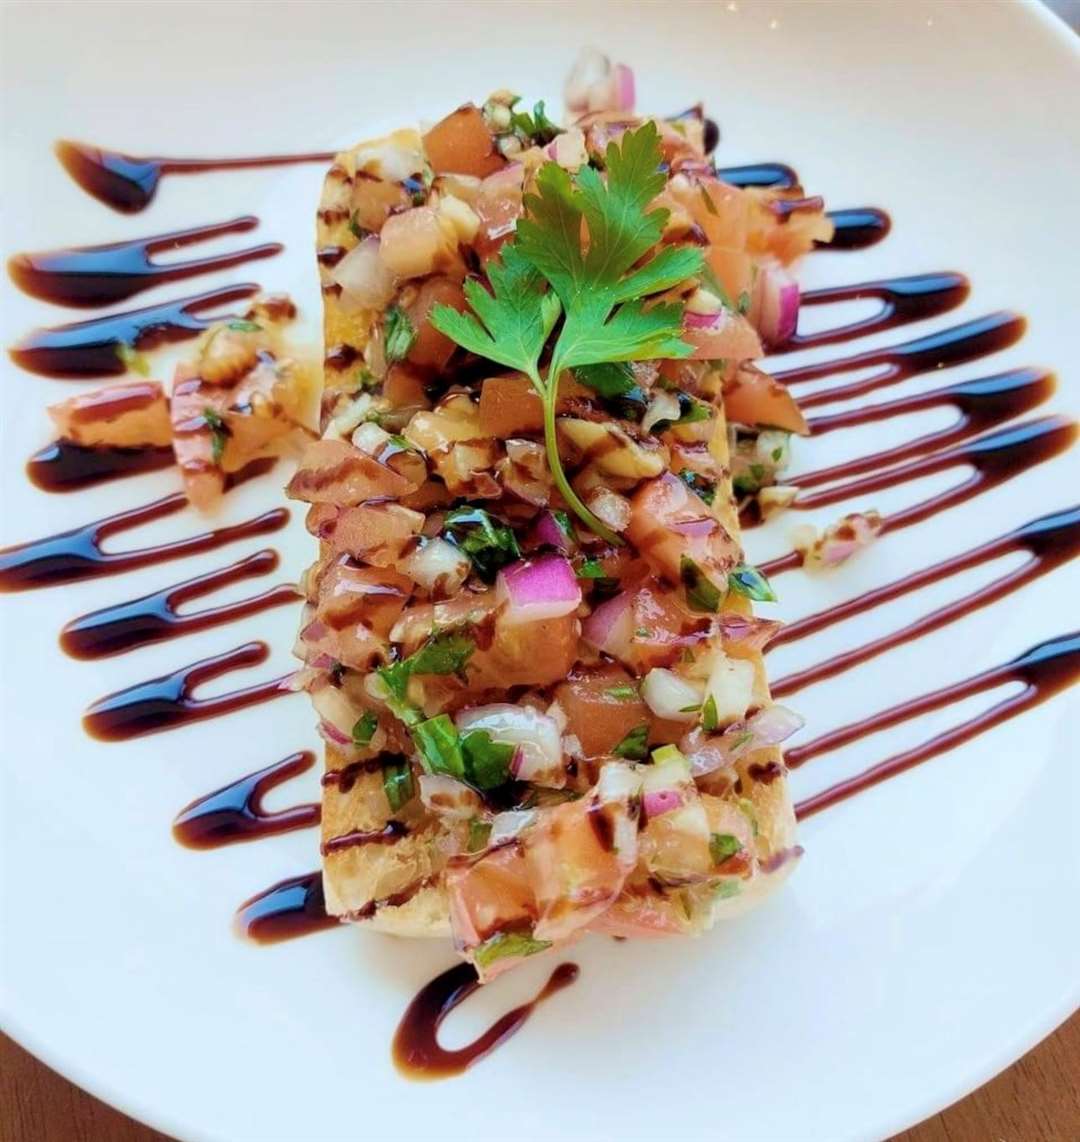 One of the teahouse's menu options was bruschetta. Picture: Tiffin Teahouse